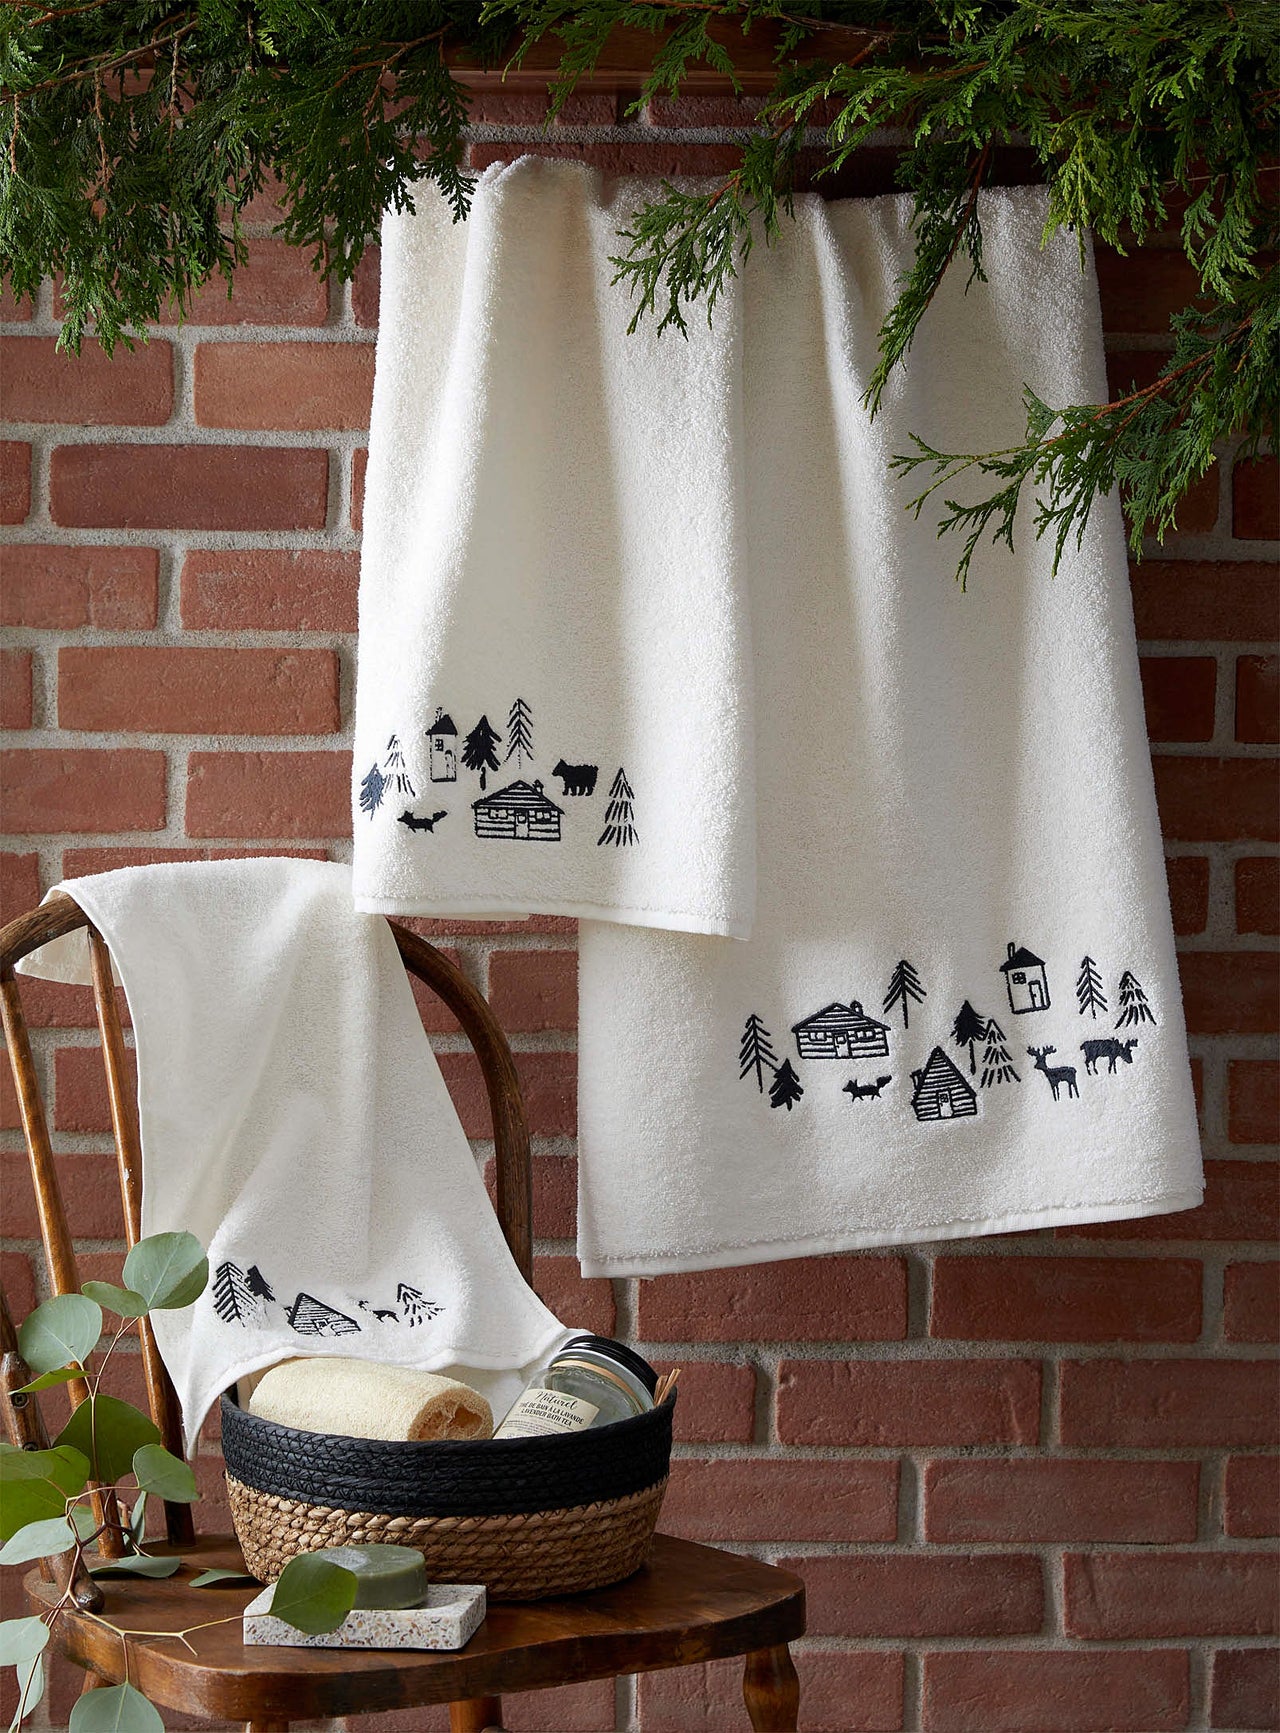 Cottage embroidery towels